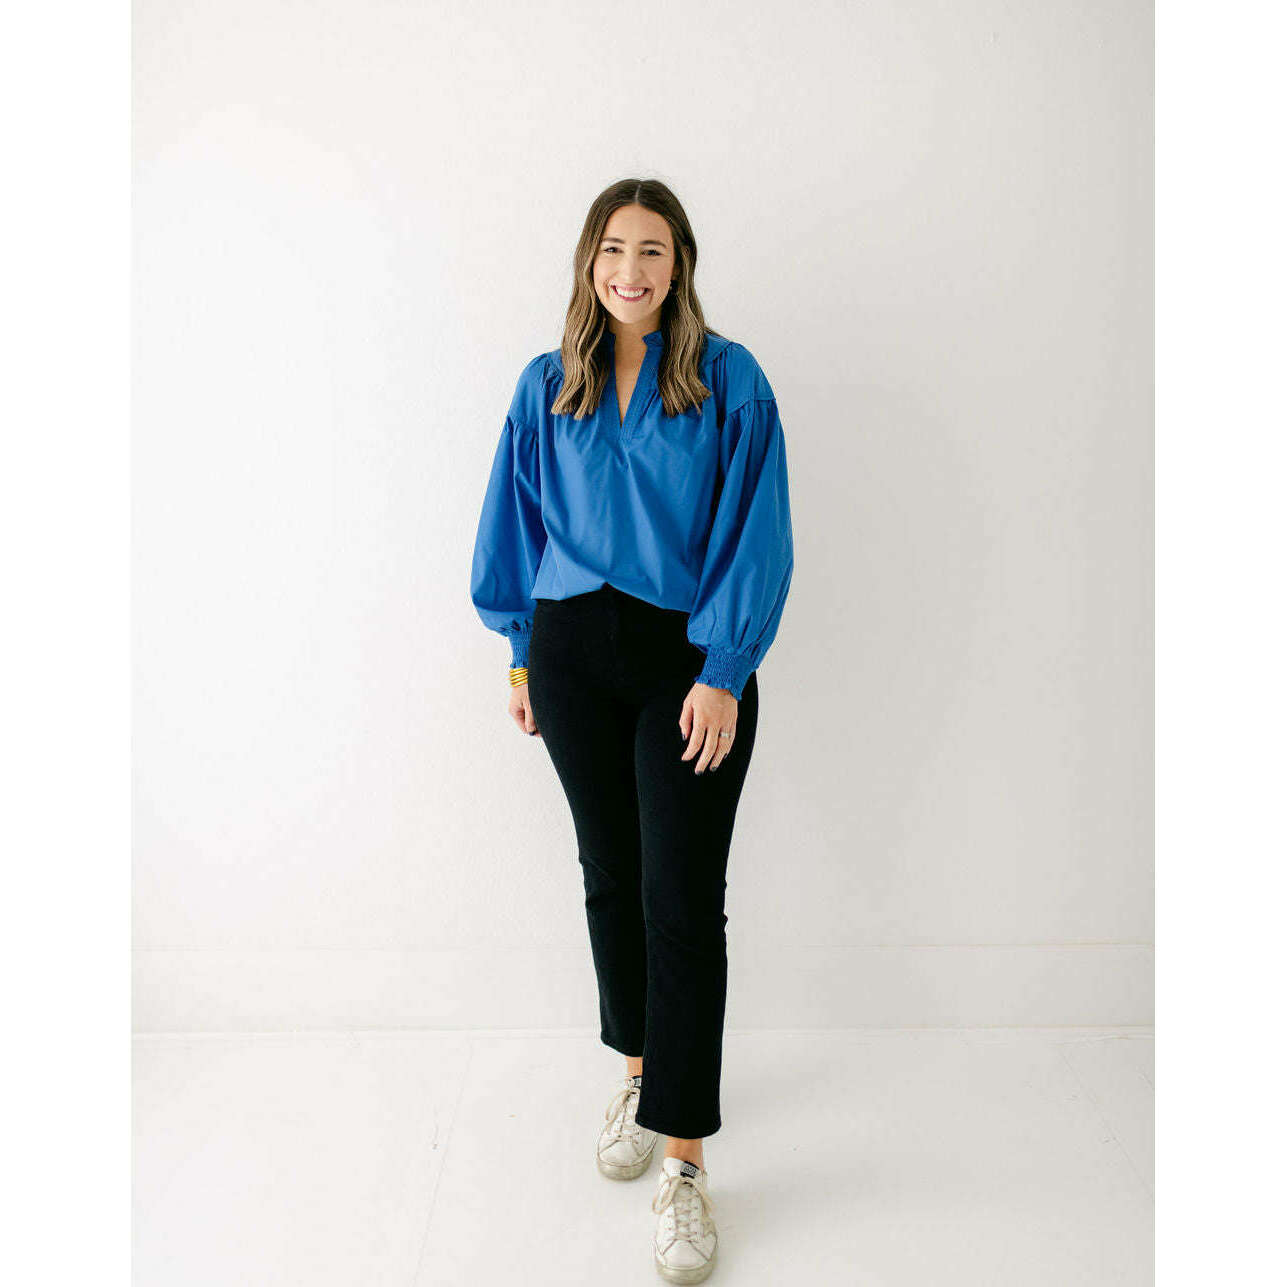 8.28 Boutique:Jade by Melody Tam,Jade Royal Blue Trimmed Top,Top